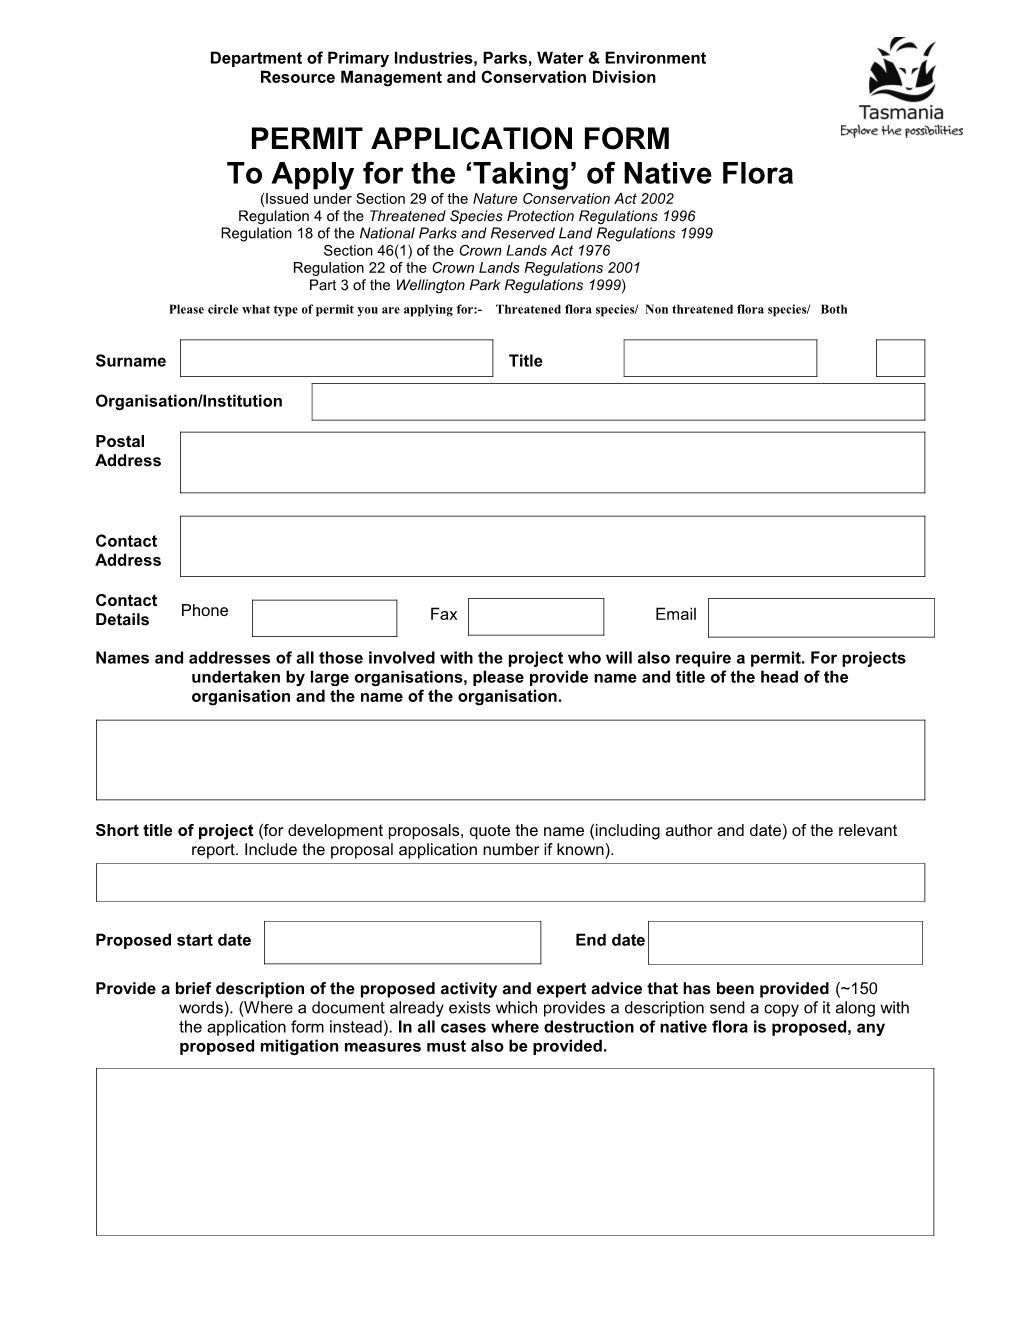 Permit Application Form to Apply for the 'Taking' of Native Flora